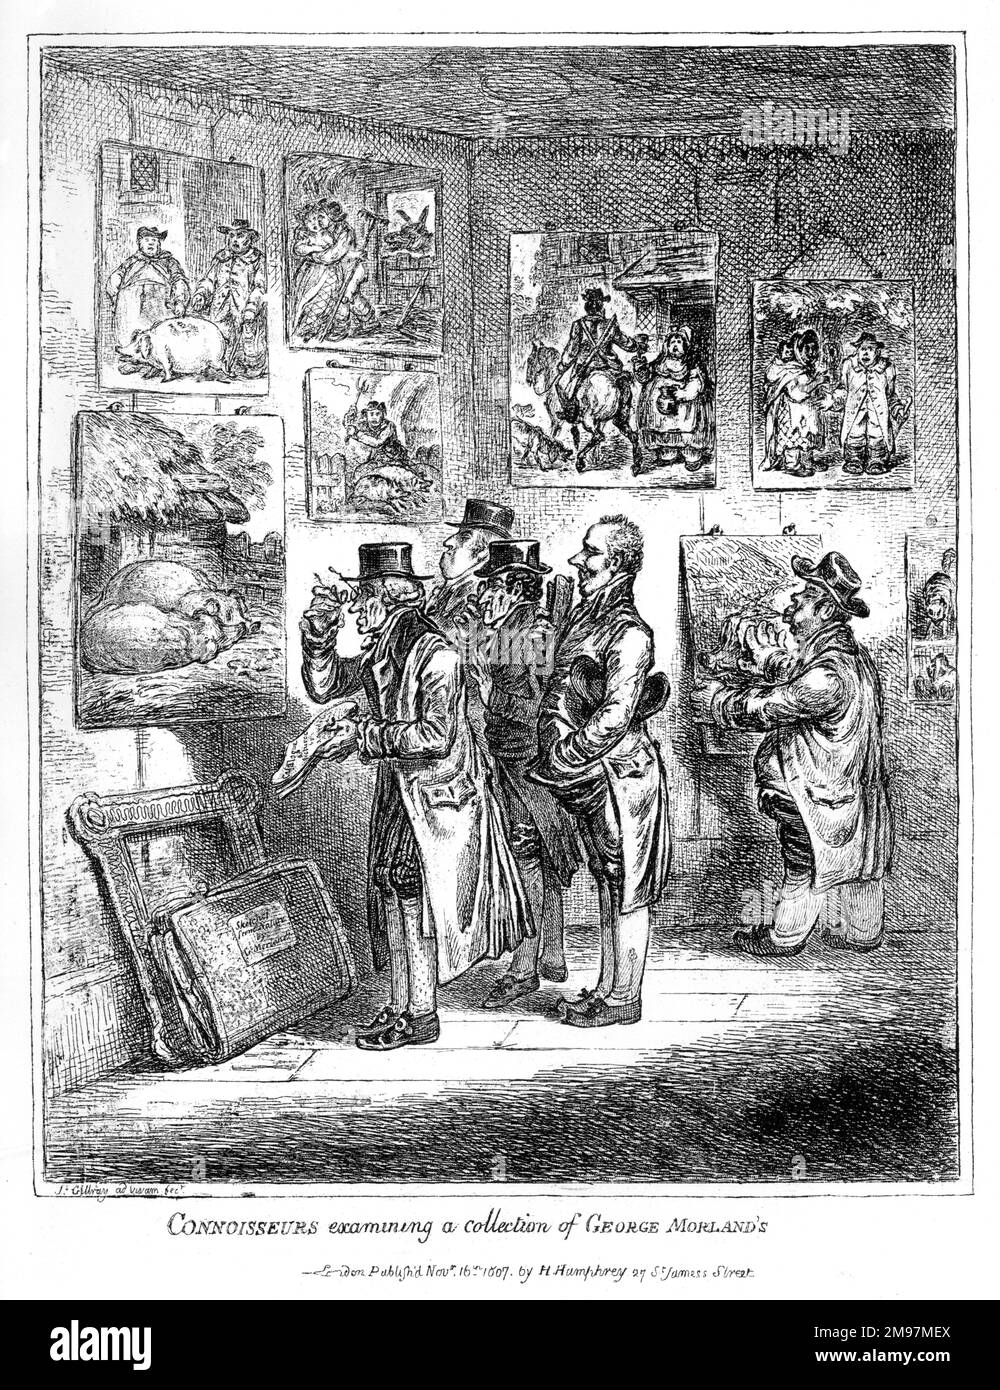 Cartoon, Connoisseurs examining a collection of George Morland's, by James Gillray.  A satire on the popularity of Morland's paintings, focusing on fat pigs, foolish donkeys and greedy dealers. Stock Photo